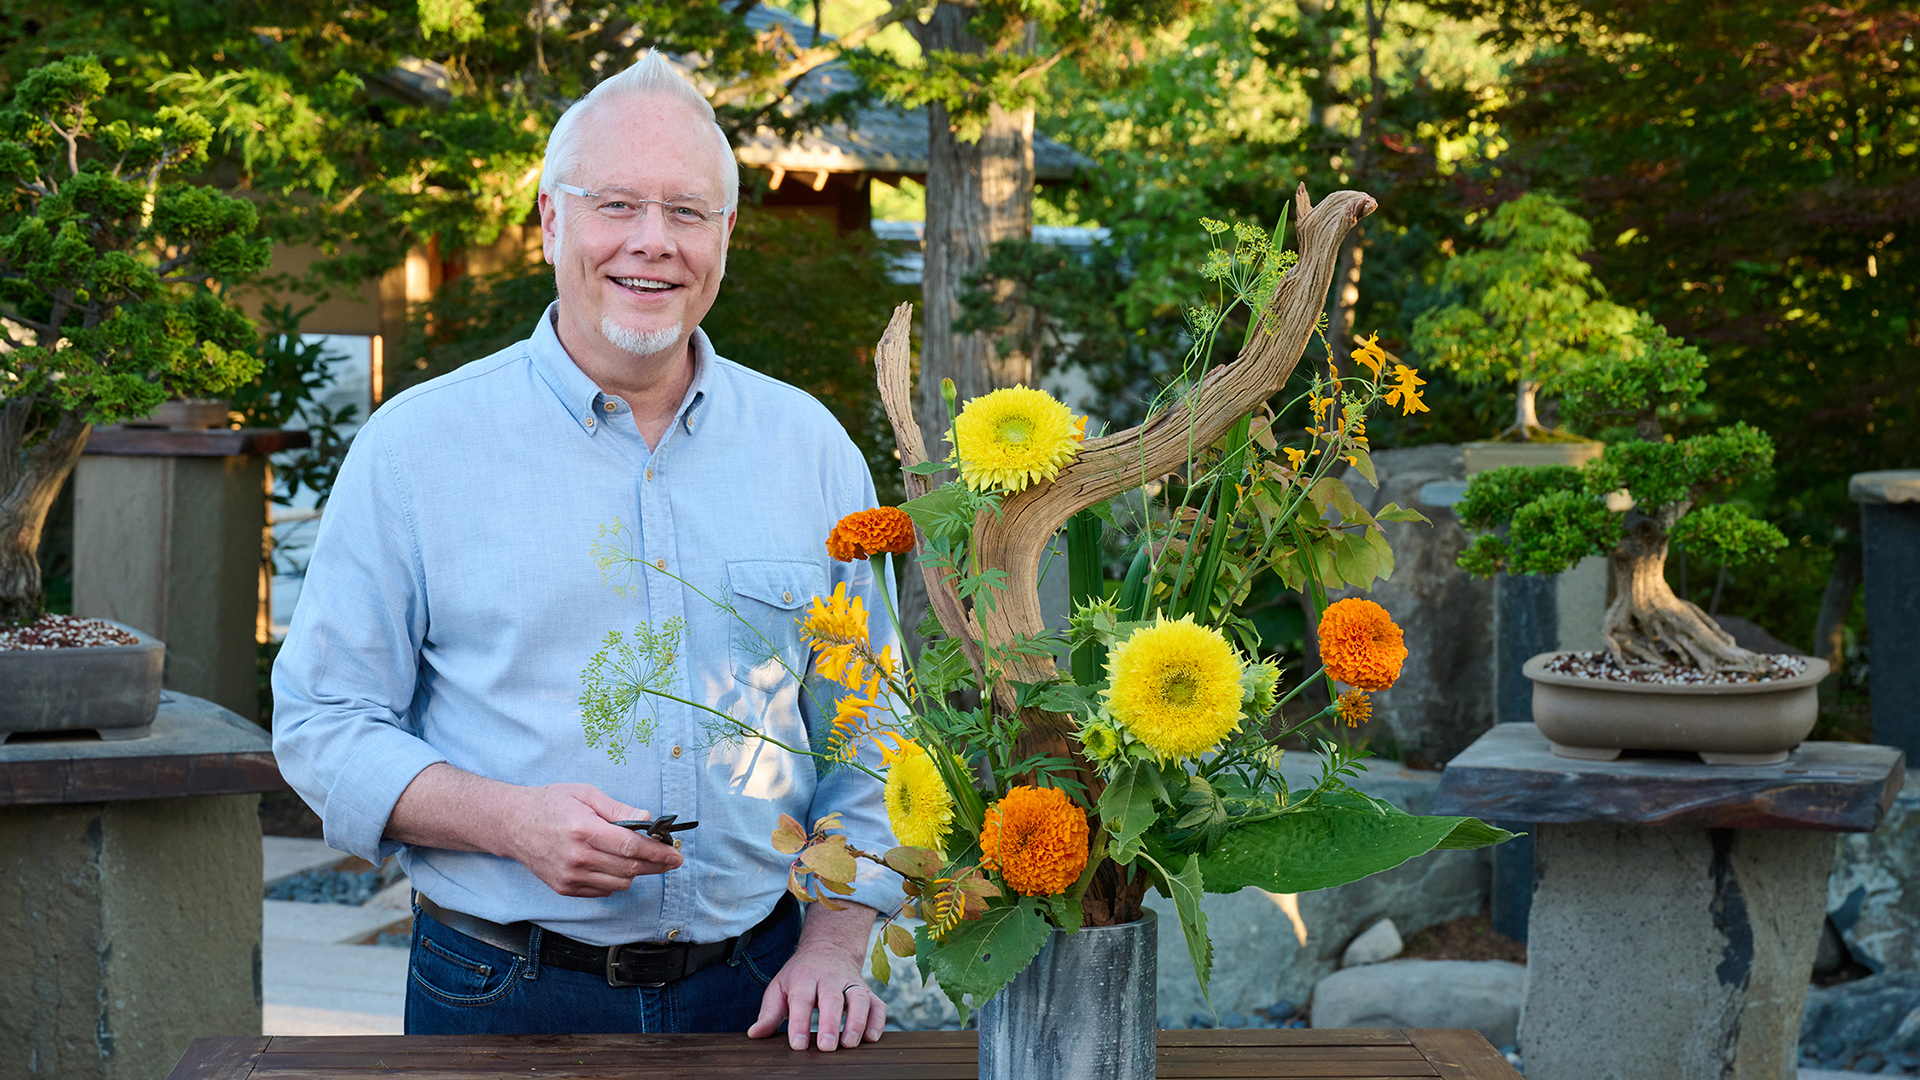 Check out J Schwanke's Life in Bloom Season 5 airing on a public television station near you!